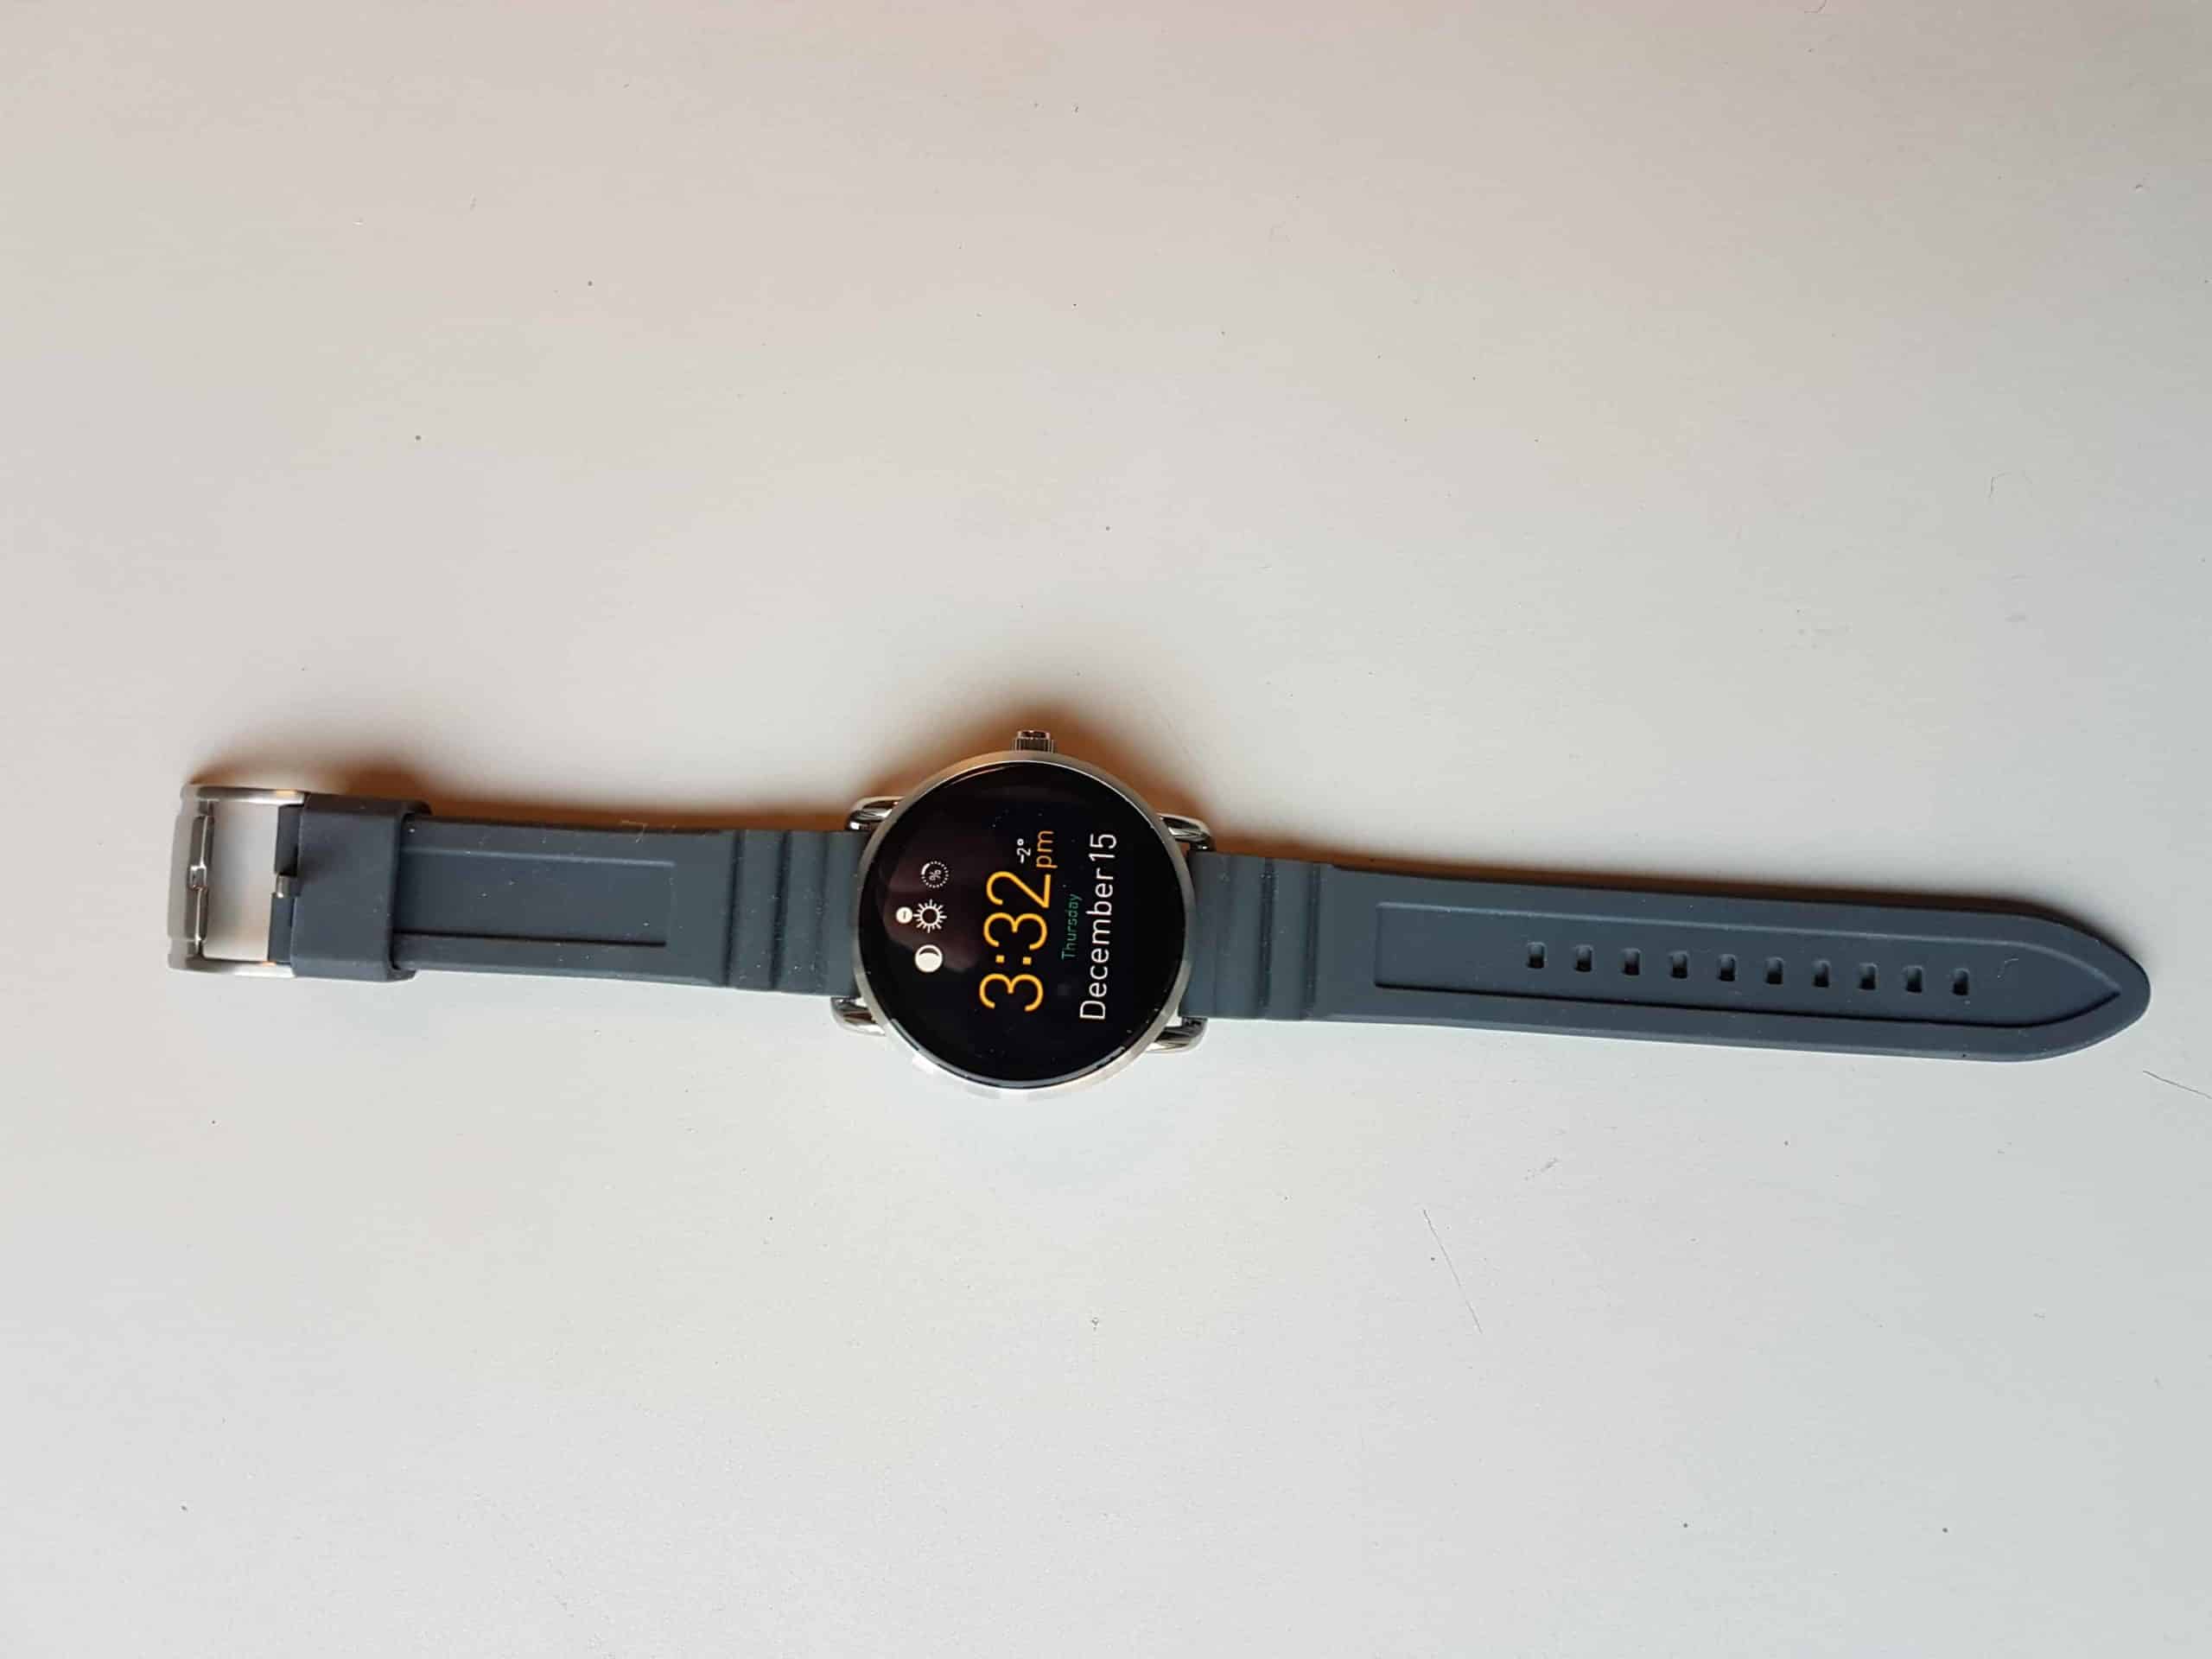 A Fossil Q smartwatch with gray straps.